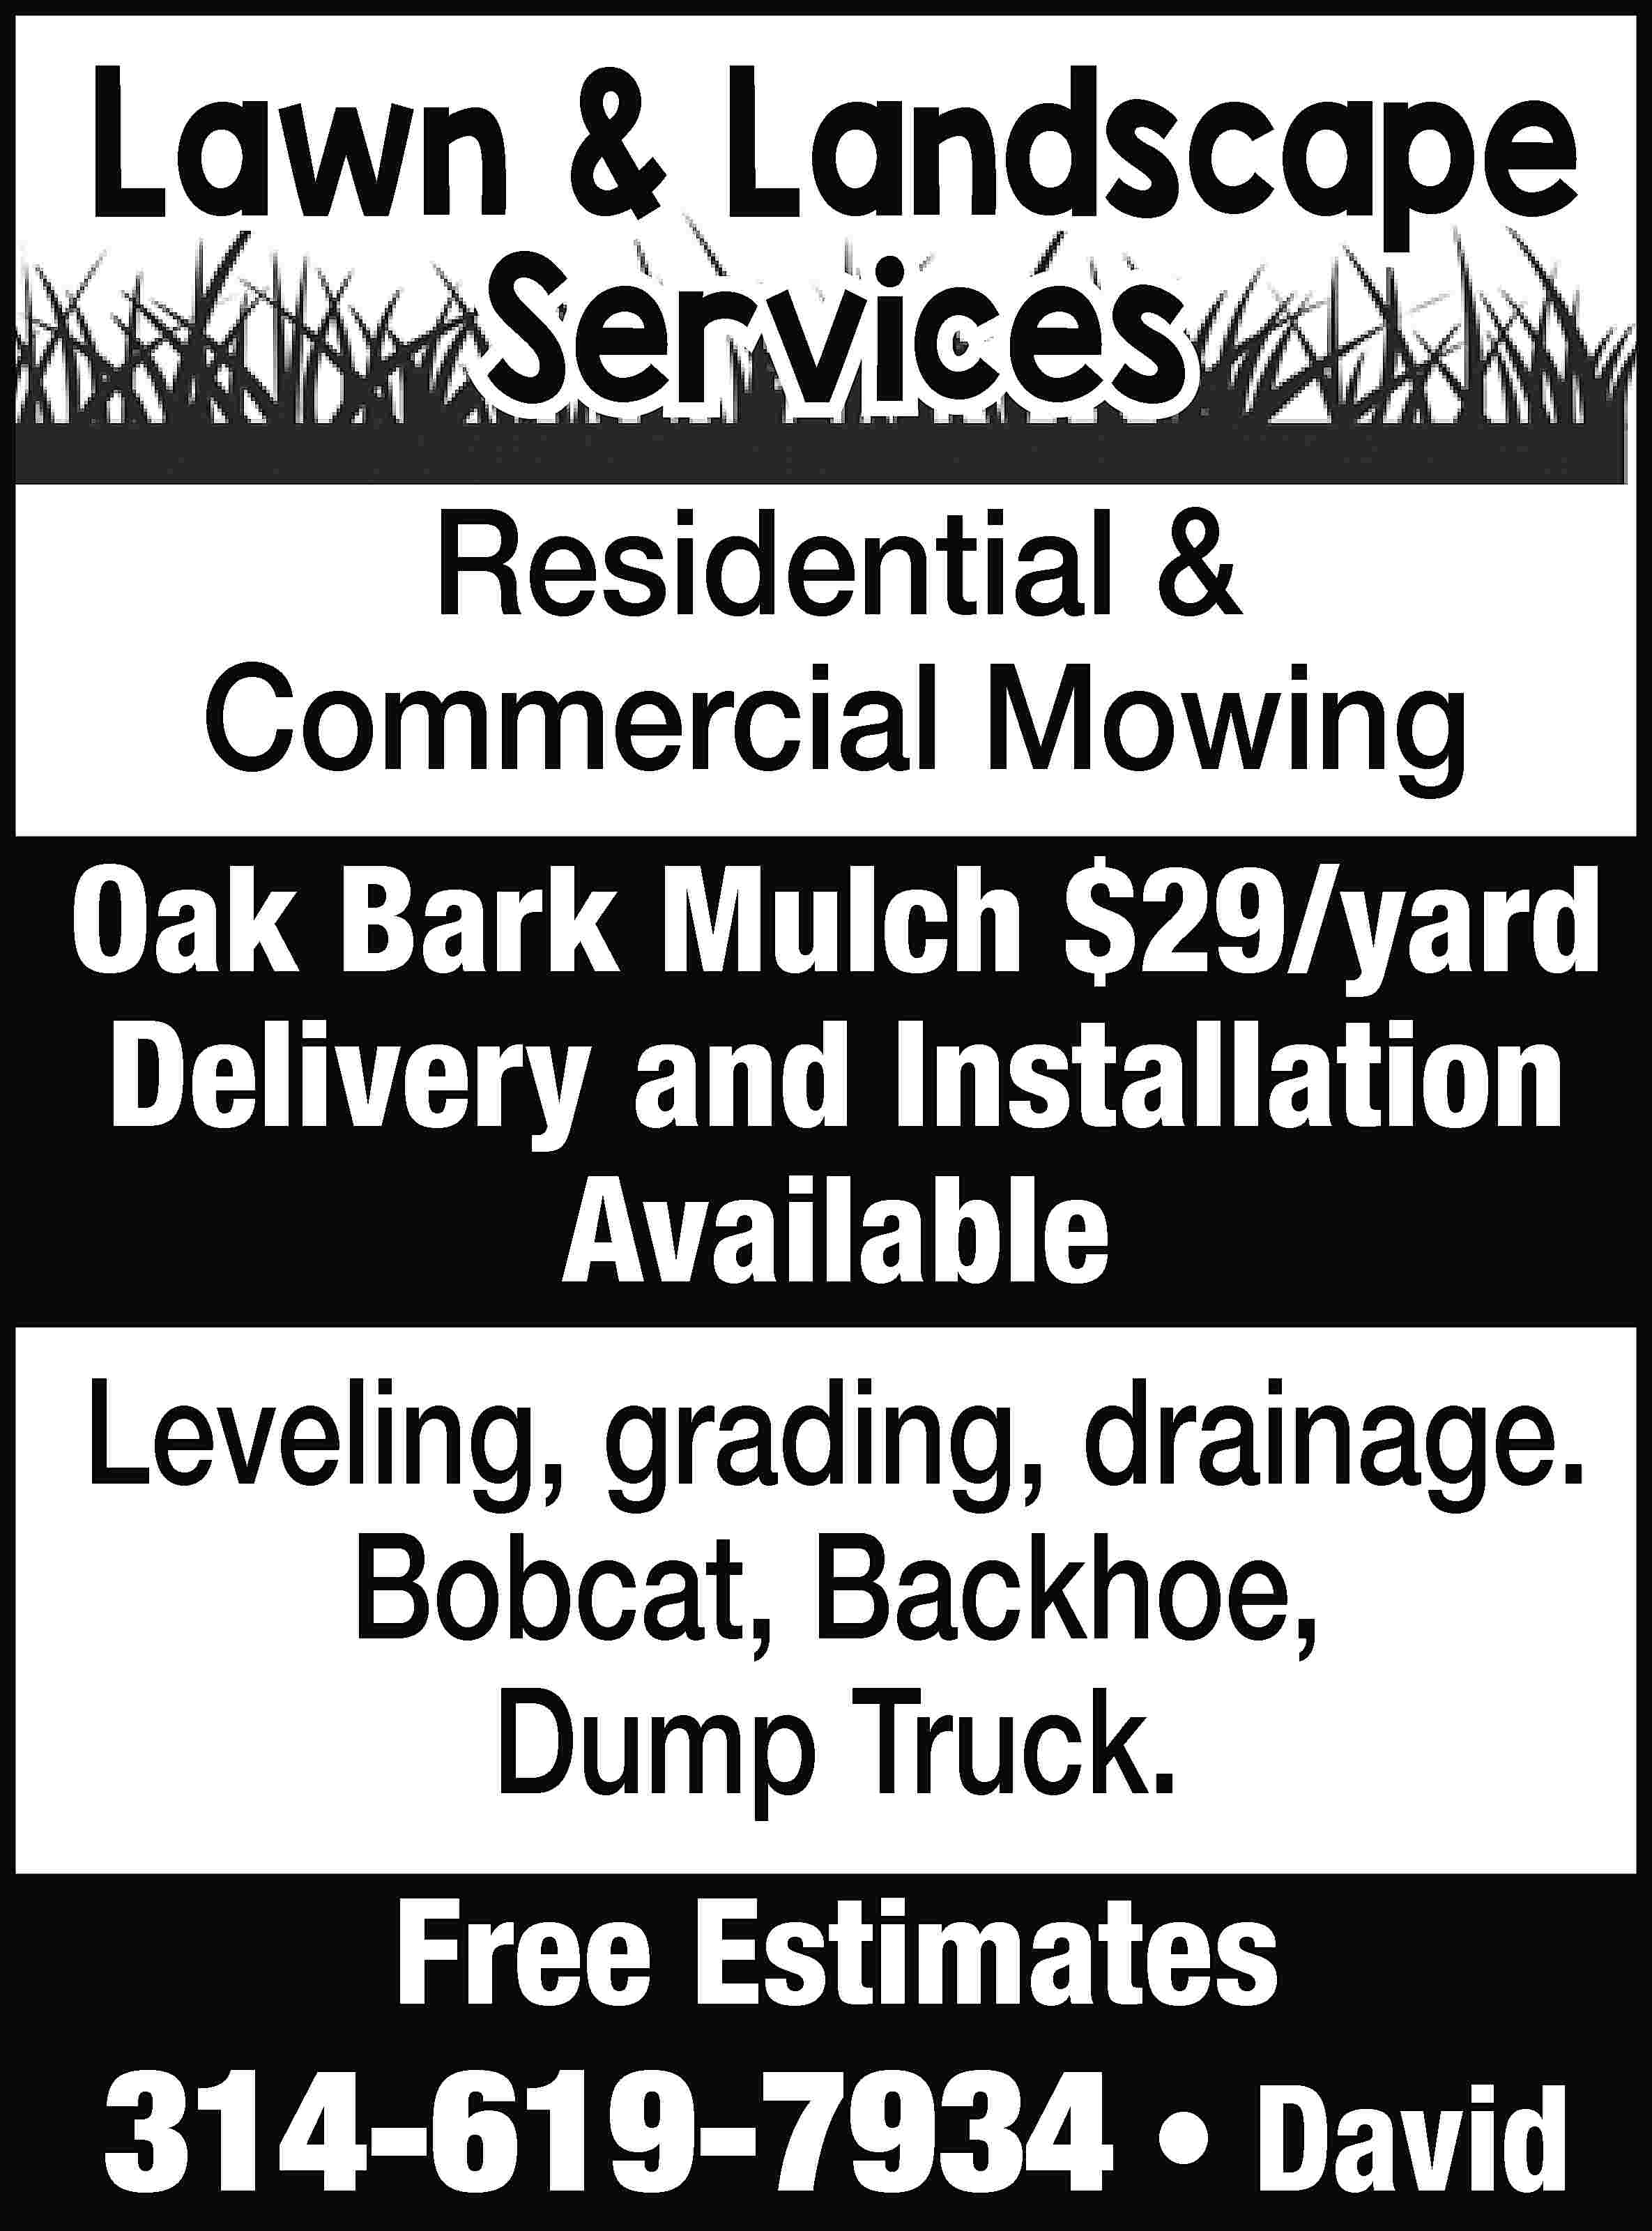 Lawn & Landscape Services Residential  Lawn & Landscape Services Residential & Commercial Mowing Oak Bark Mulch $29/yard Delivery and Installation Available Leveling, grading, drainage. Bobcat, Backhoe, Dump Truck. Free Estimates 314-619-7934 • David